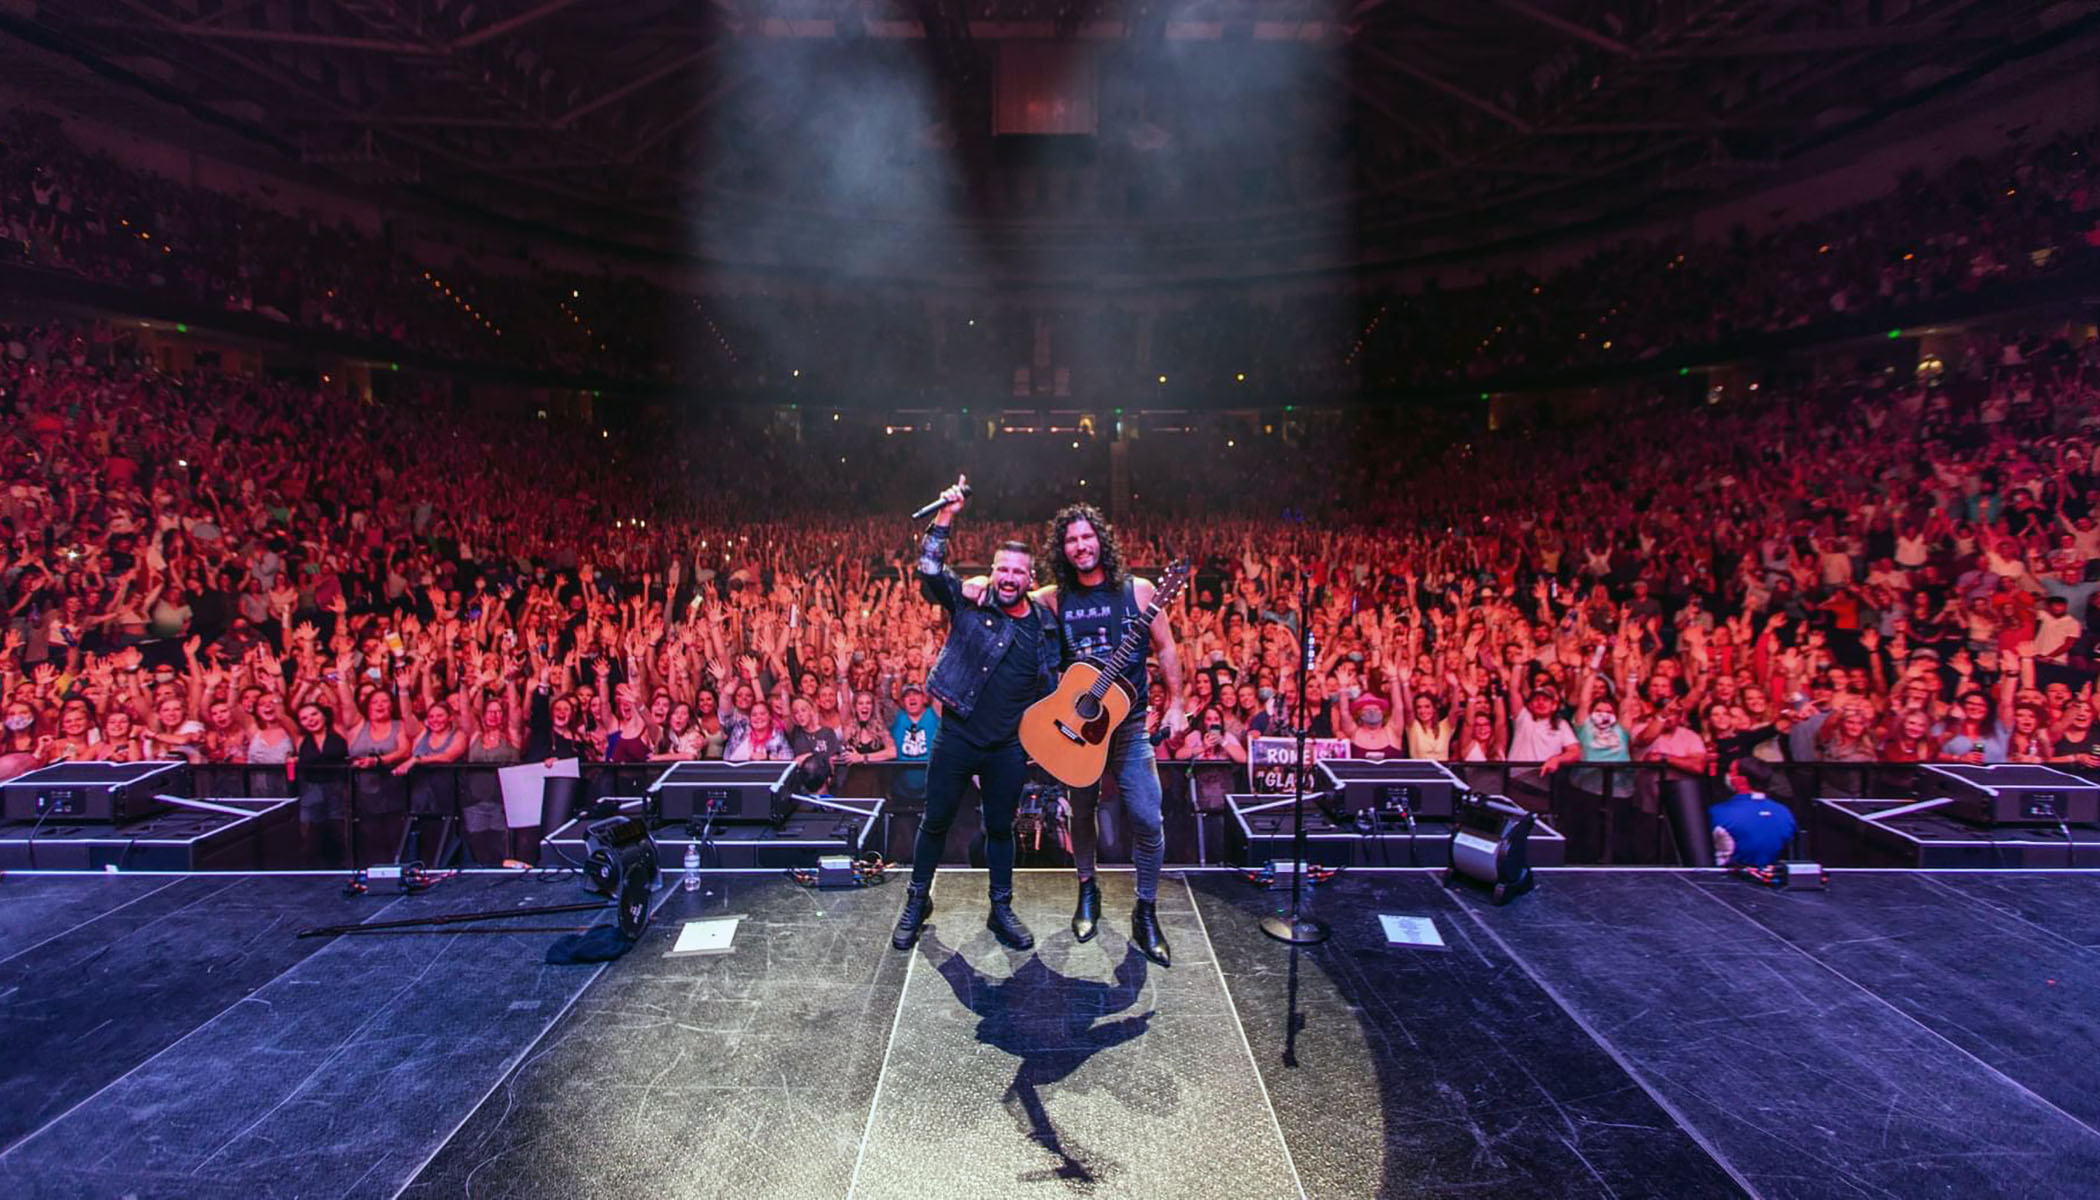 L-Acoustics K1 and K2 are Good Things for Dan + Shay’s First Headlining US Arena Tour featured image